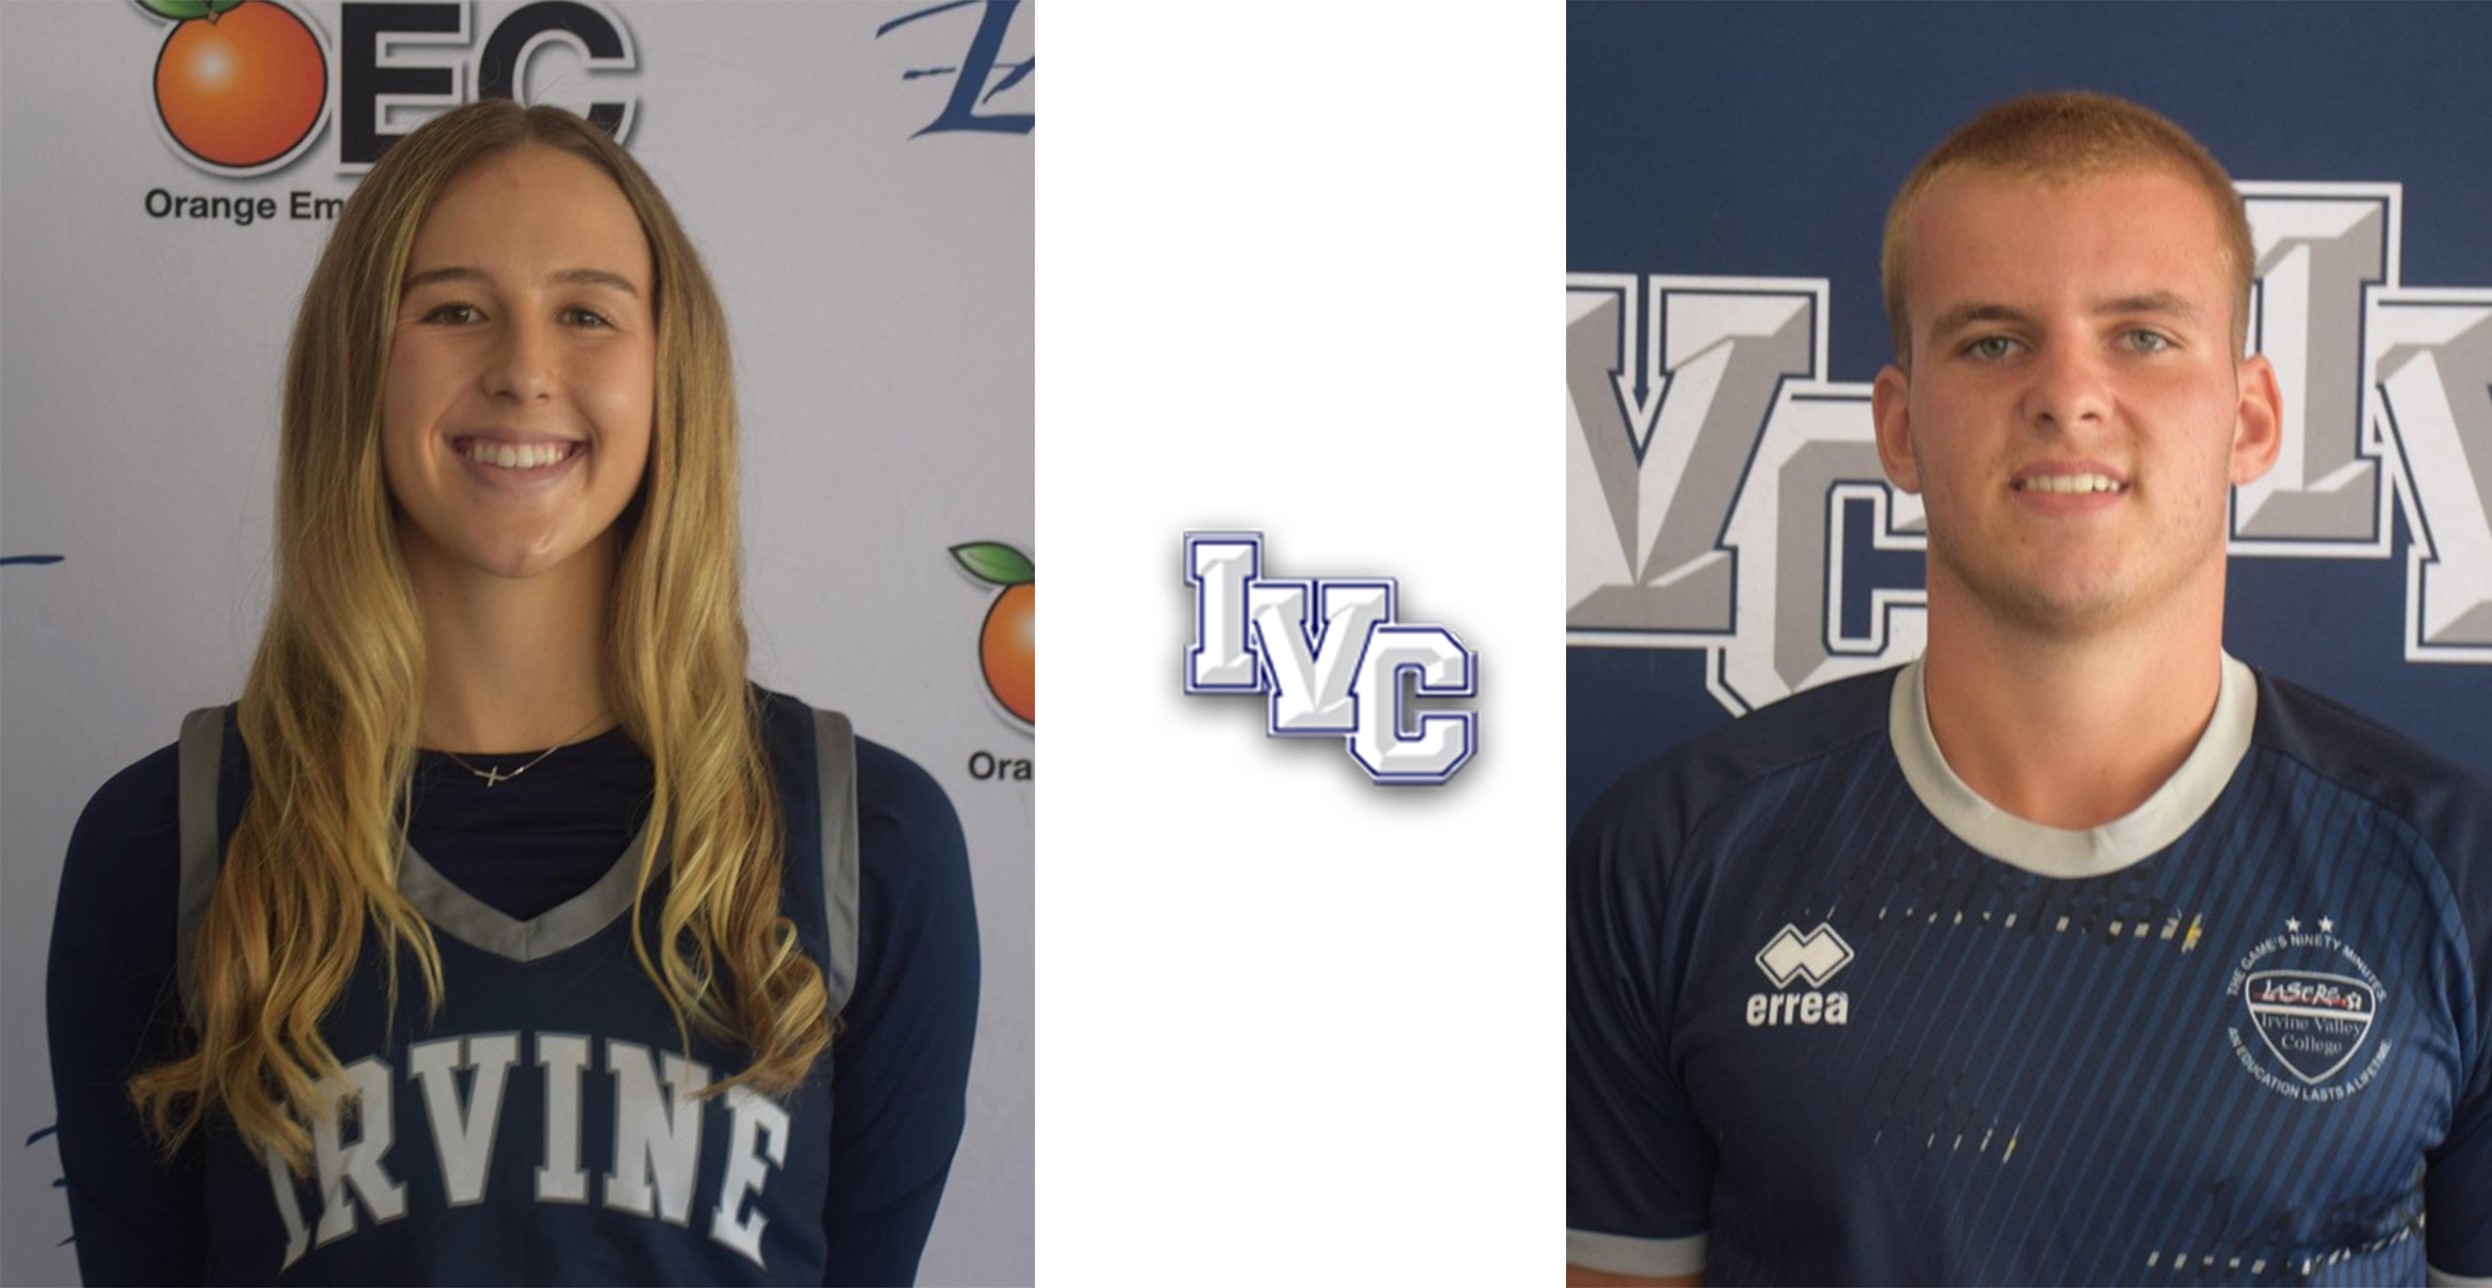 Pucci and Svoboda named IVC's scholar athletes of the year